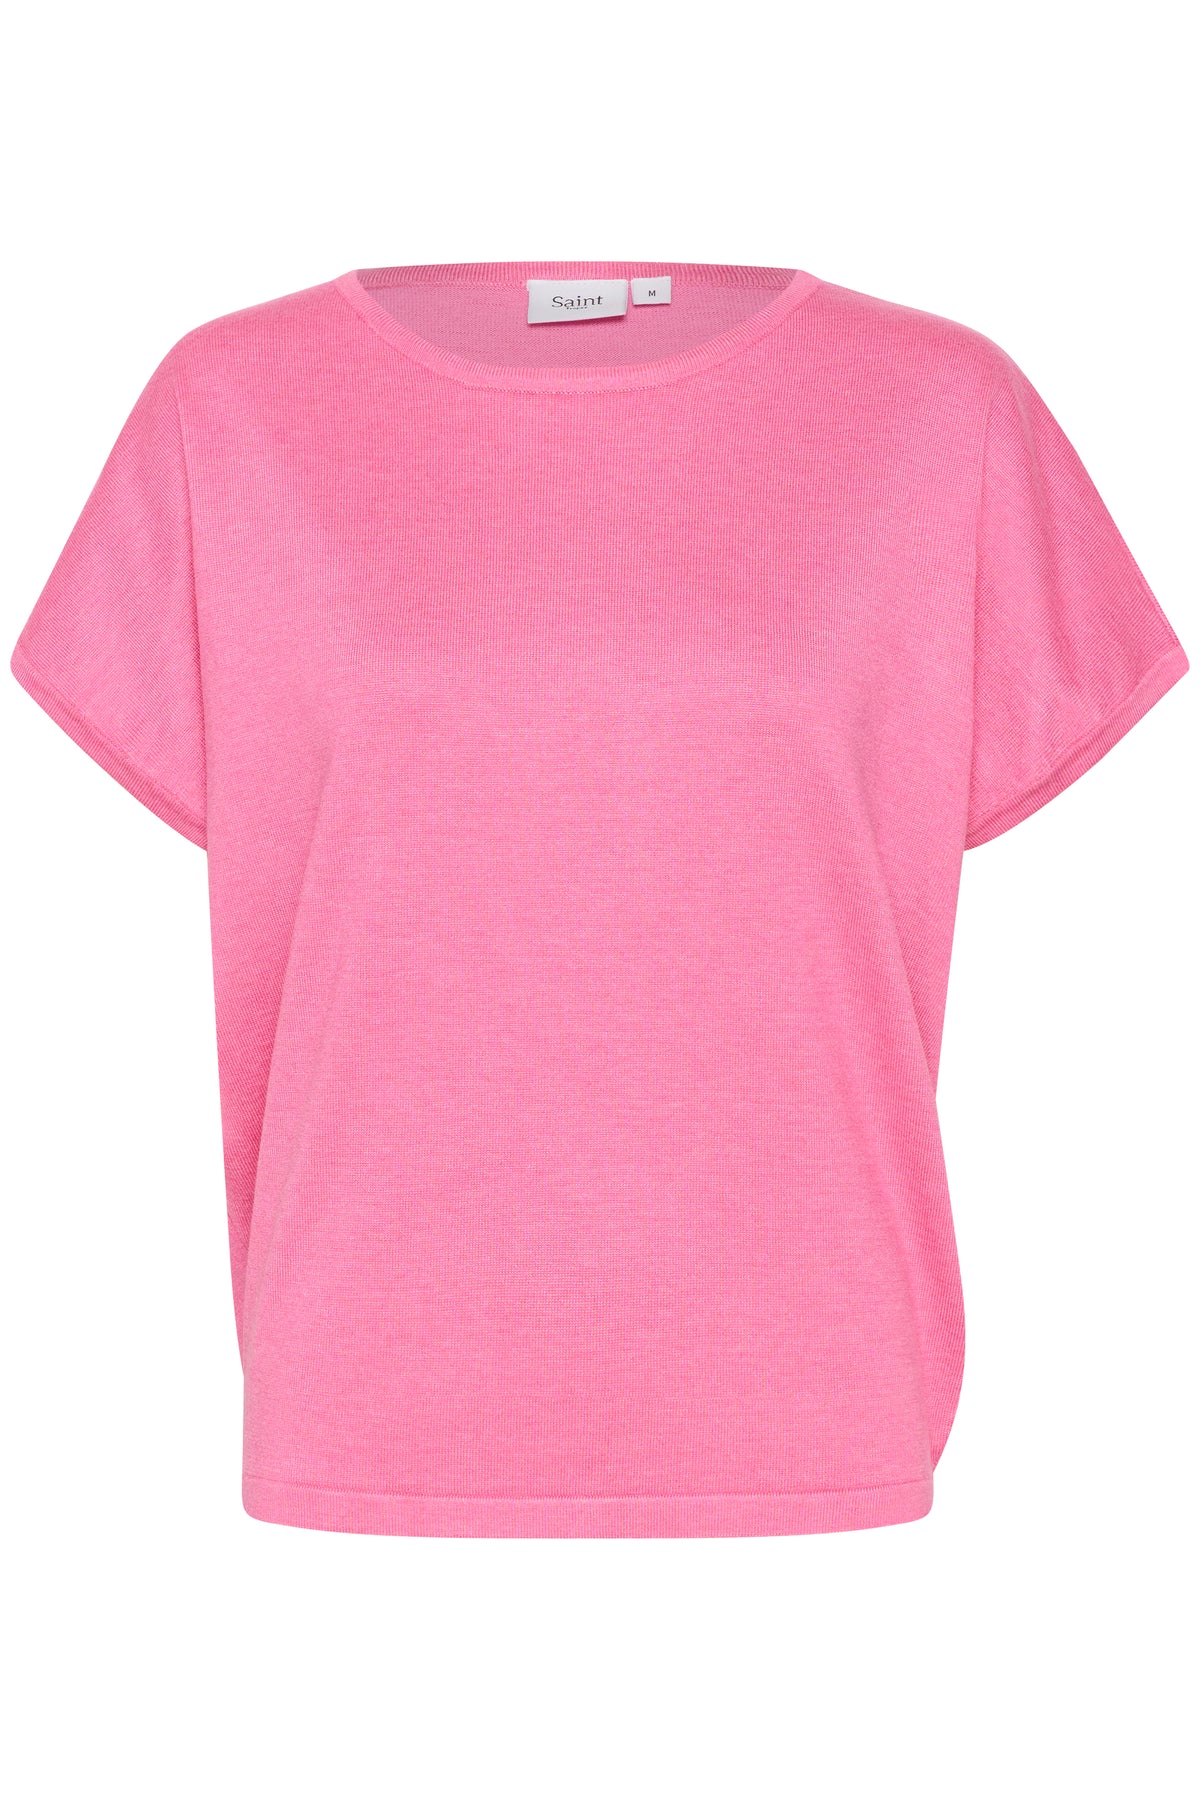 Saint Tropez Mila Pink Cosmos Melange Short Sleeve Relaxed Fit Knit, 30513284